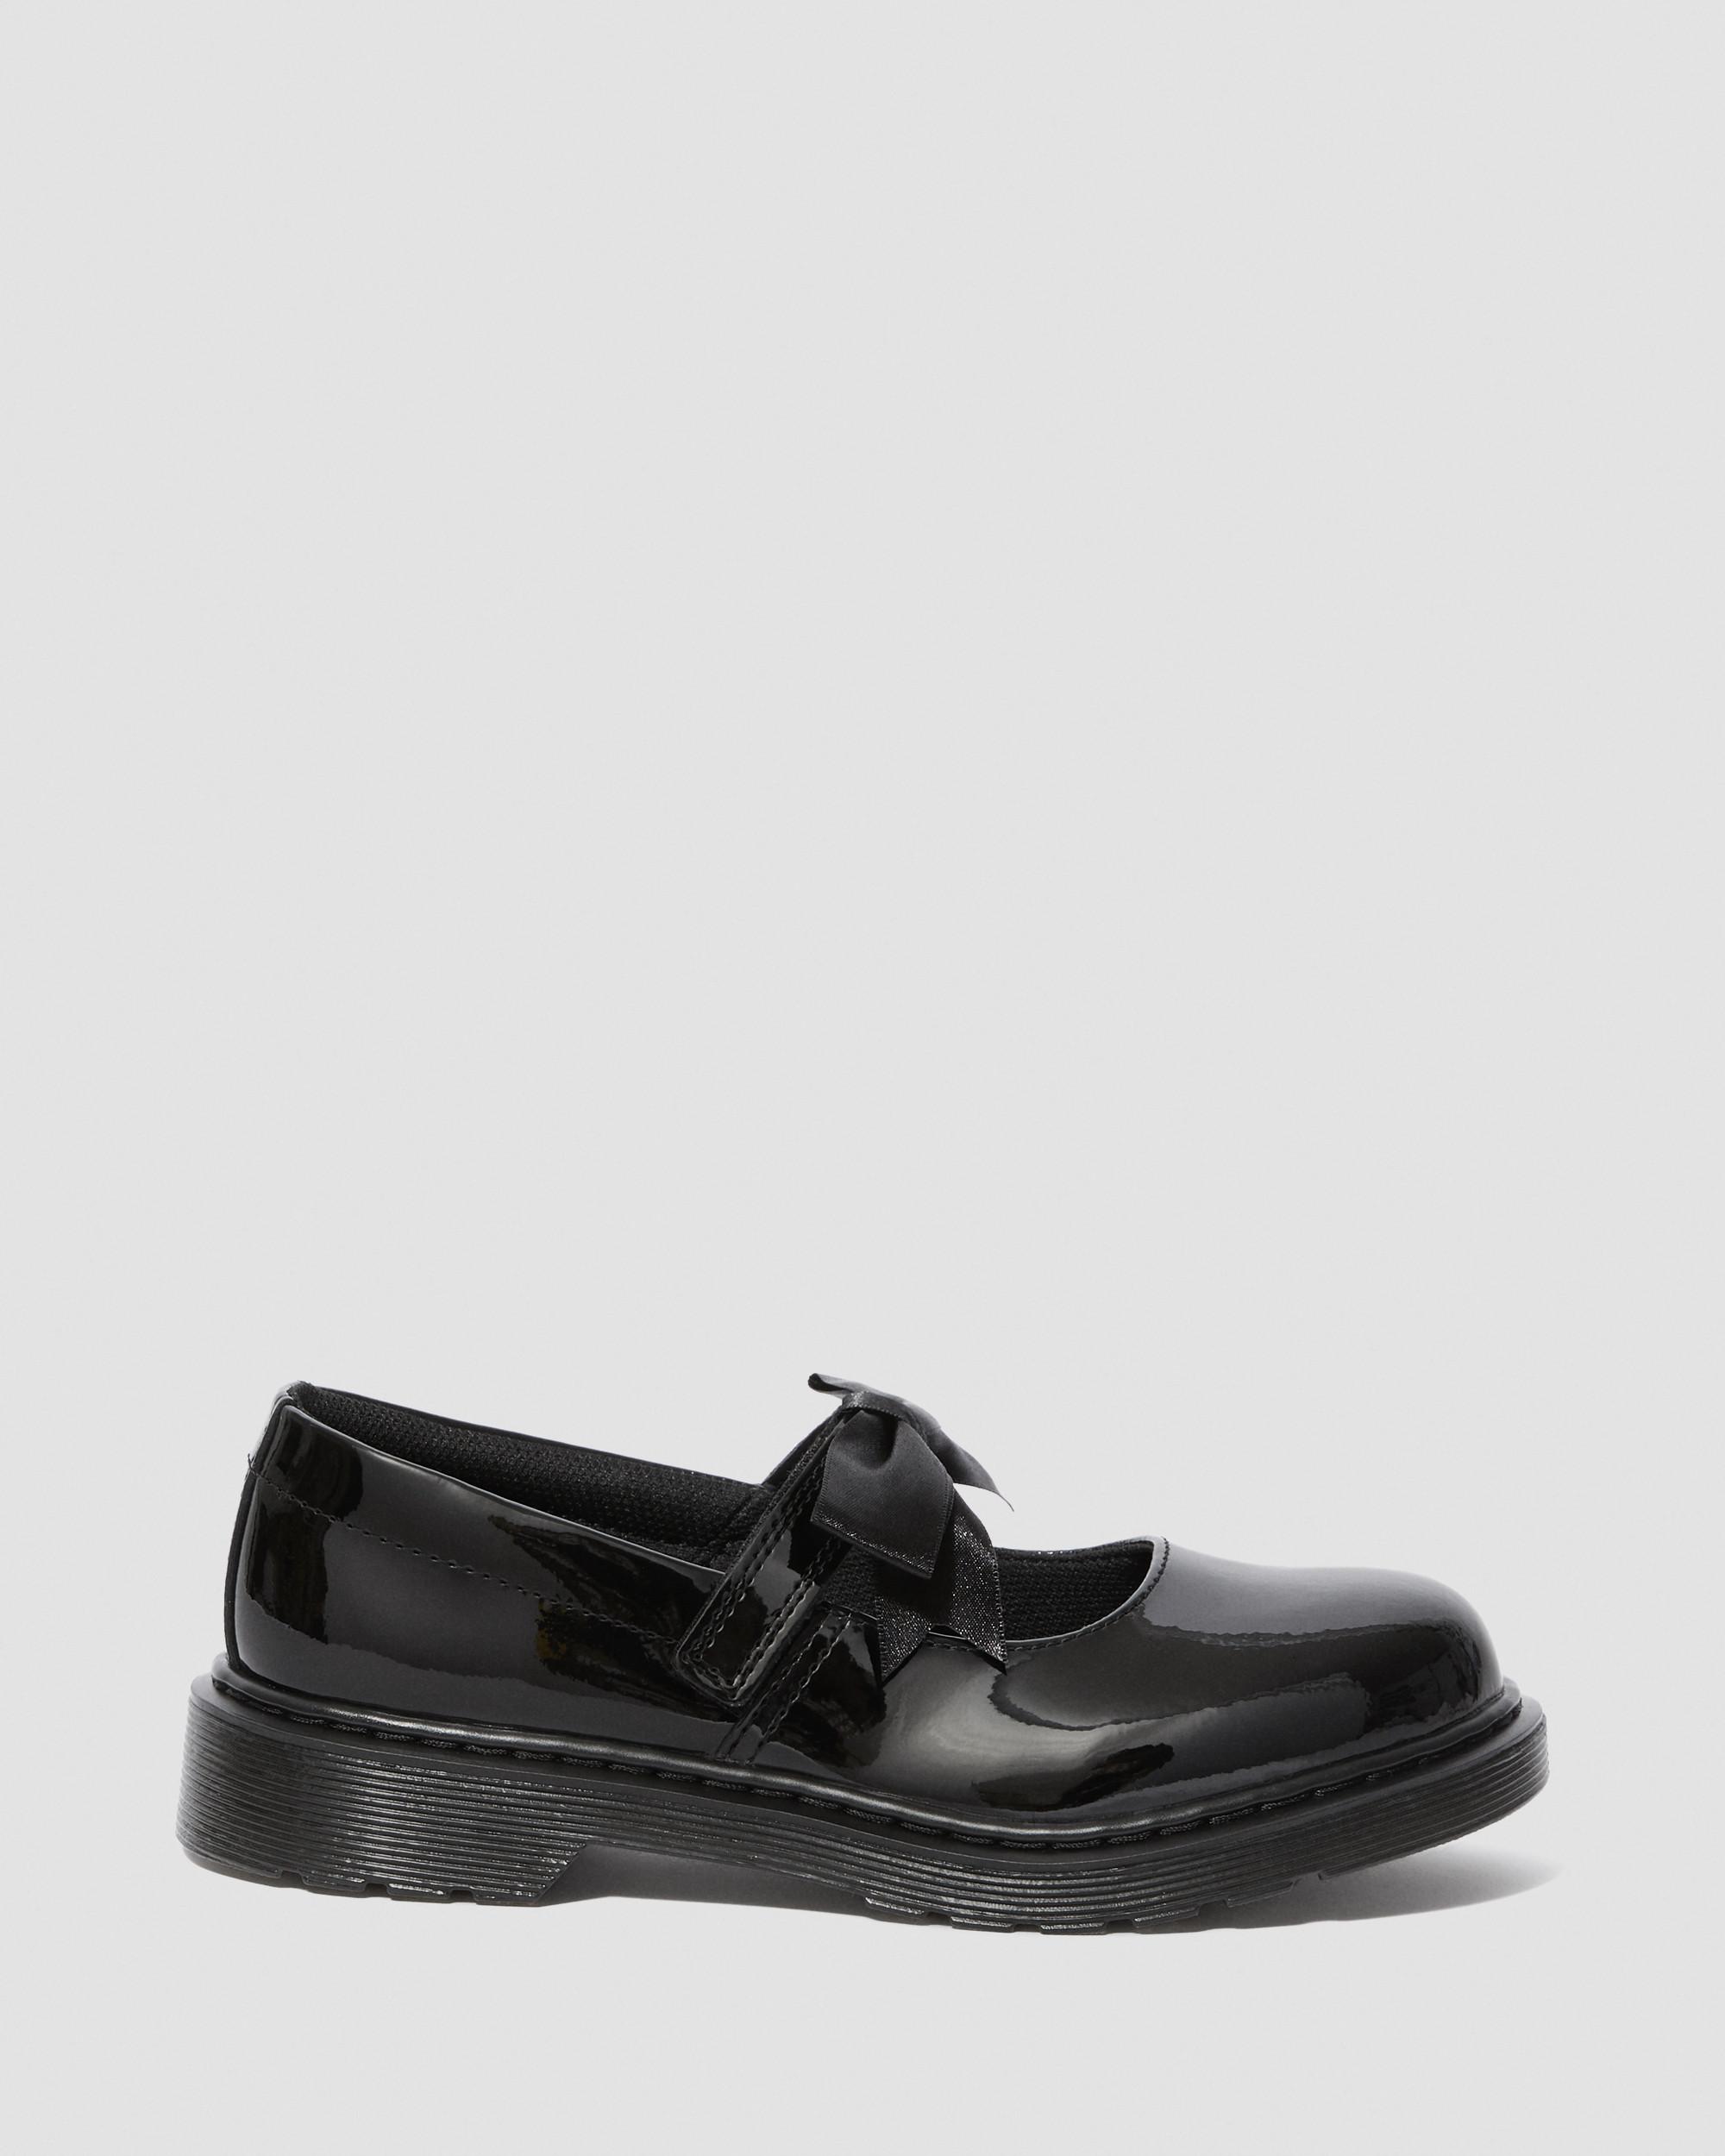 Youth Maccy II Patent Mary Jane Shoes in Black